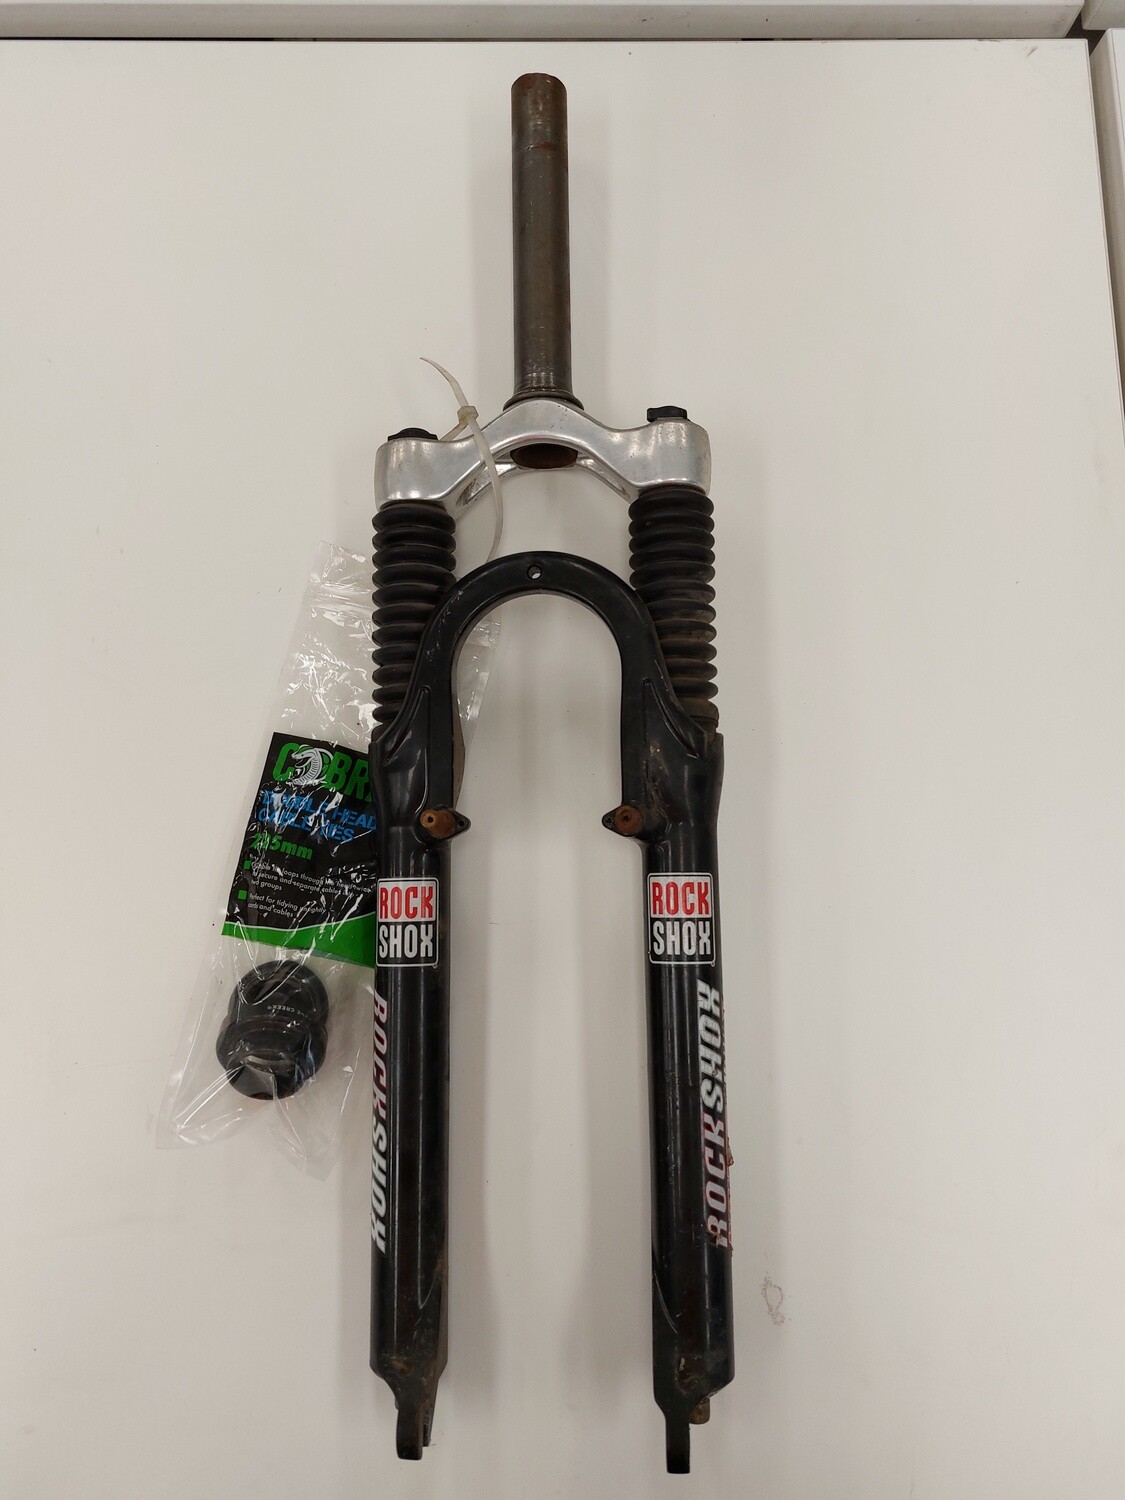 Rock Shox Fork - Sold as is